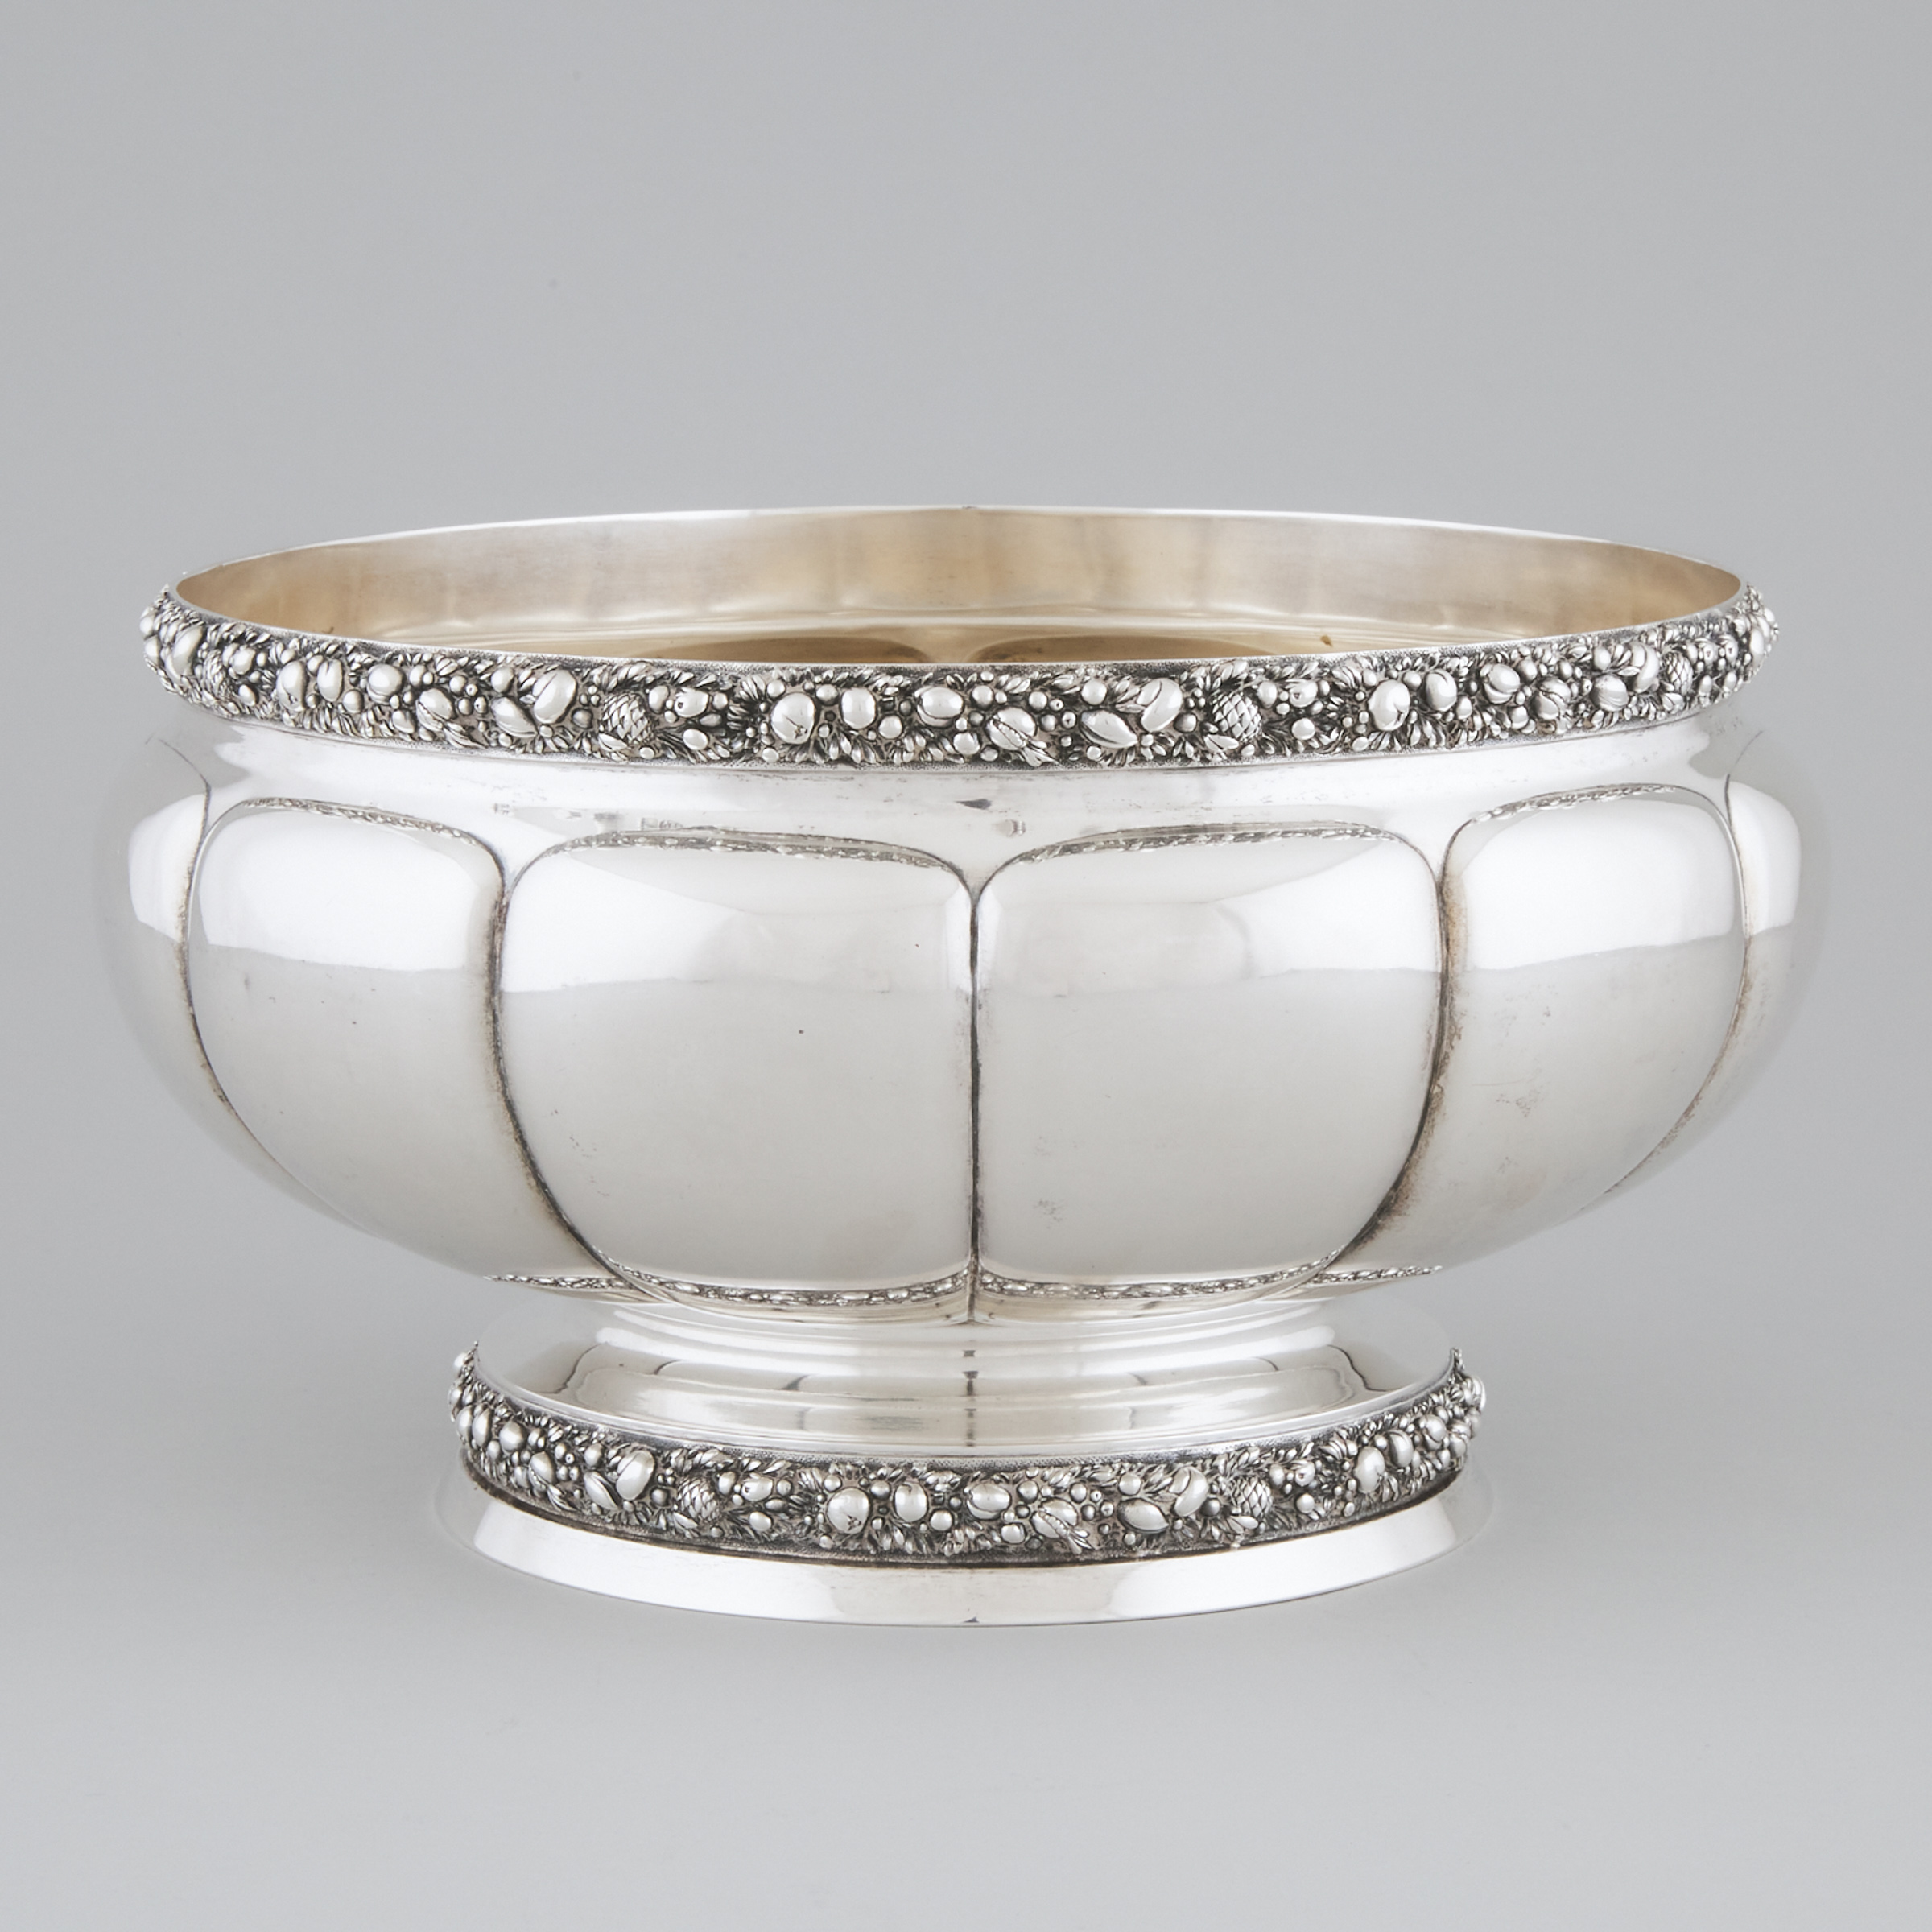 German Silver Footed Bowl, Clemens Dahmen, Cologne, early 20th century